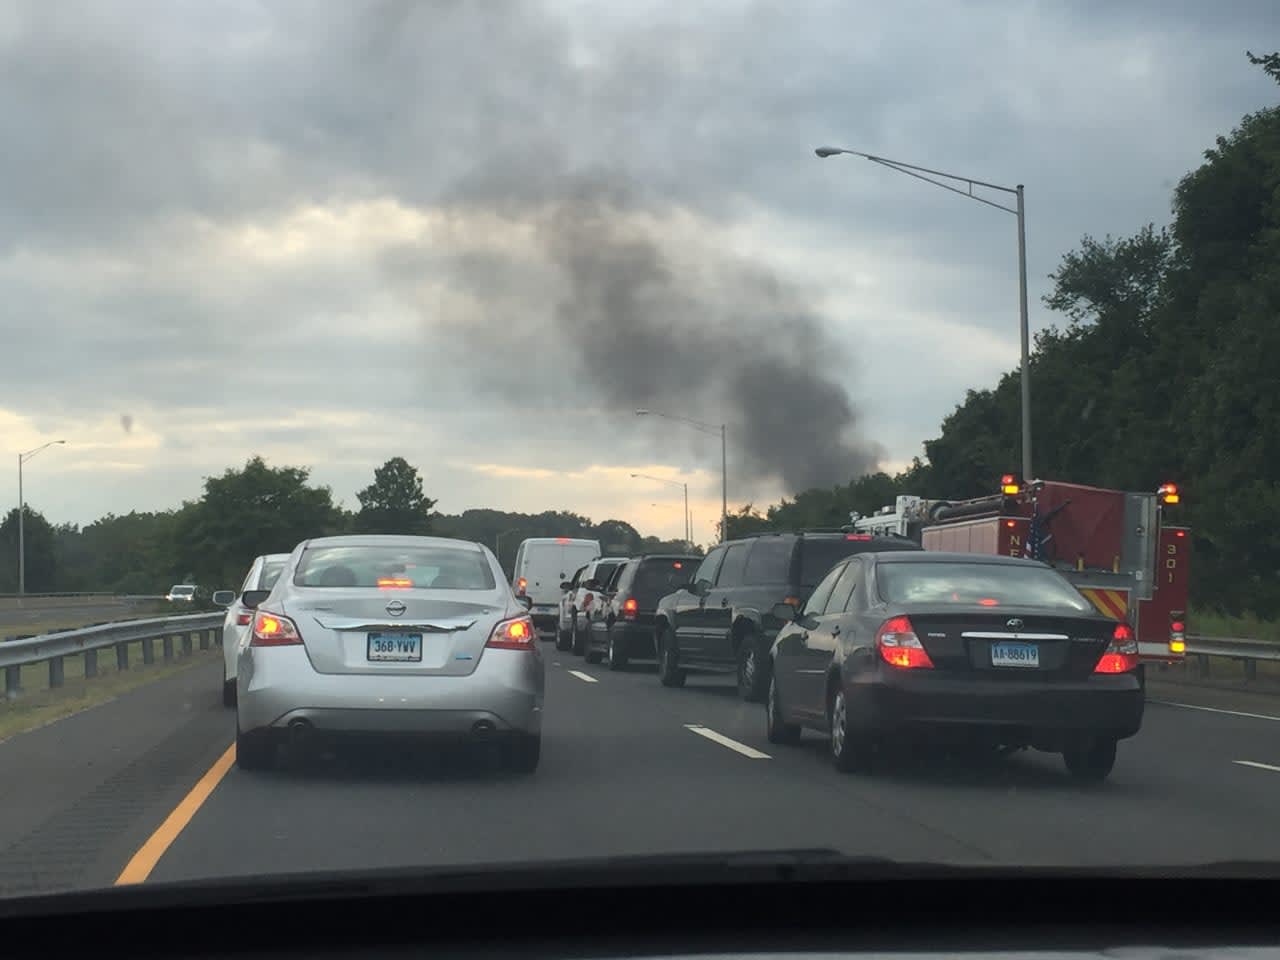 Traffic was slowed after a vehicle fire on Route 8 southbound near Exit 7 in Trumbull.